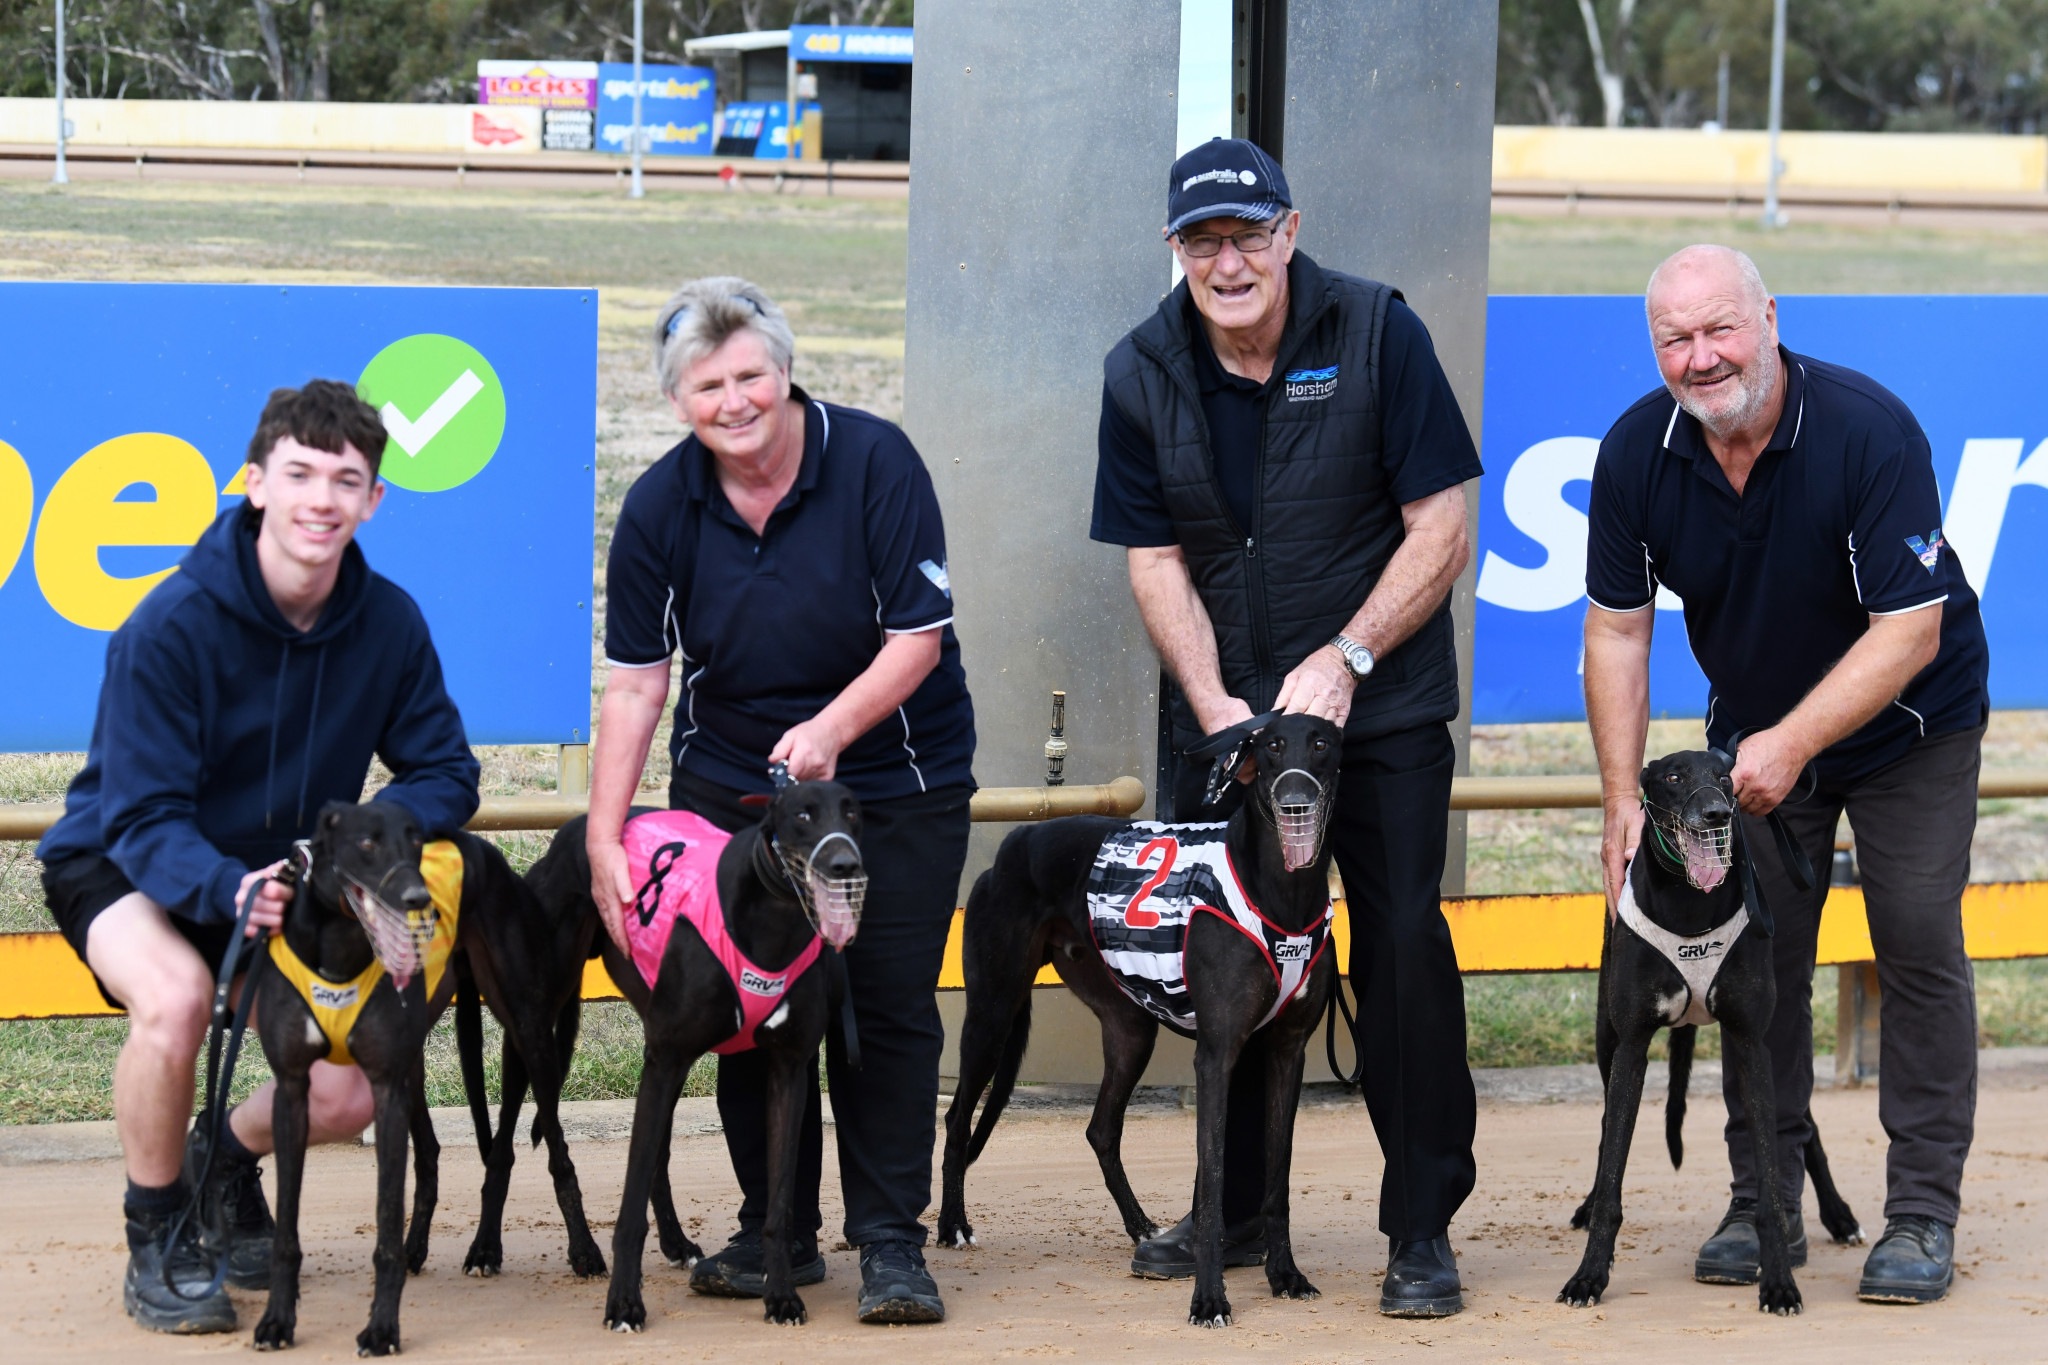 Winner Fitzroy Bale with Dezi Carter, Spring Port with Andrea Gurry, Westar Commander with Ian Bibby, Yanic Bale with Paul Matheson.